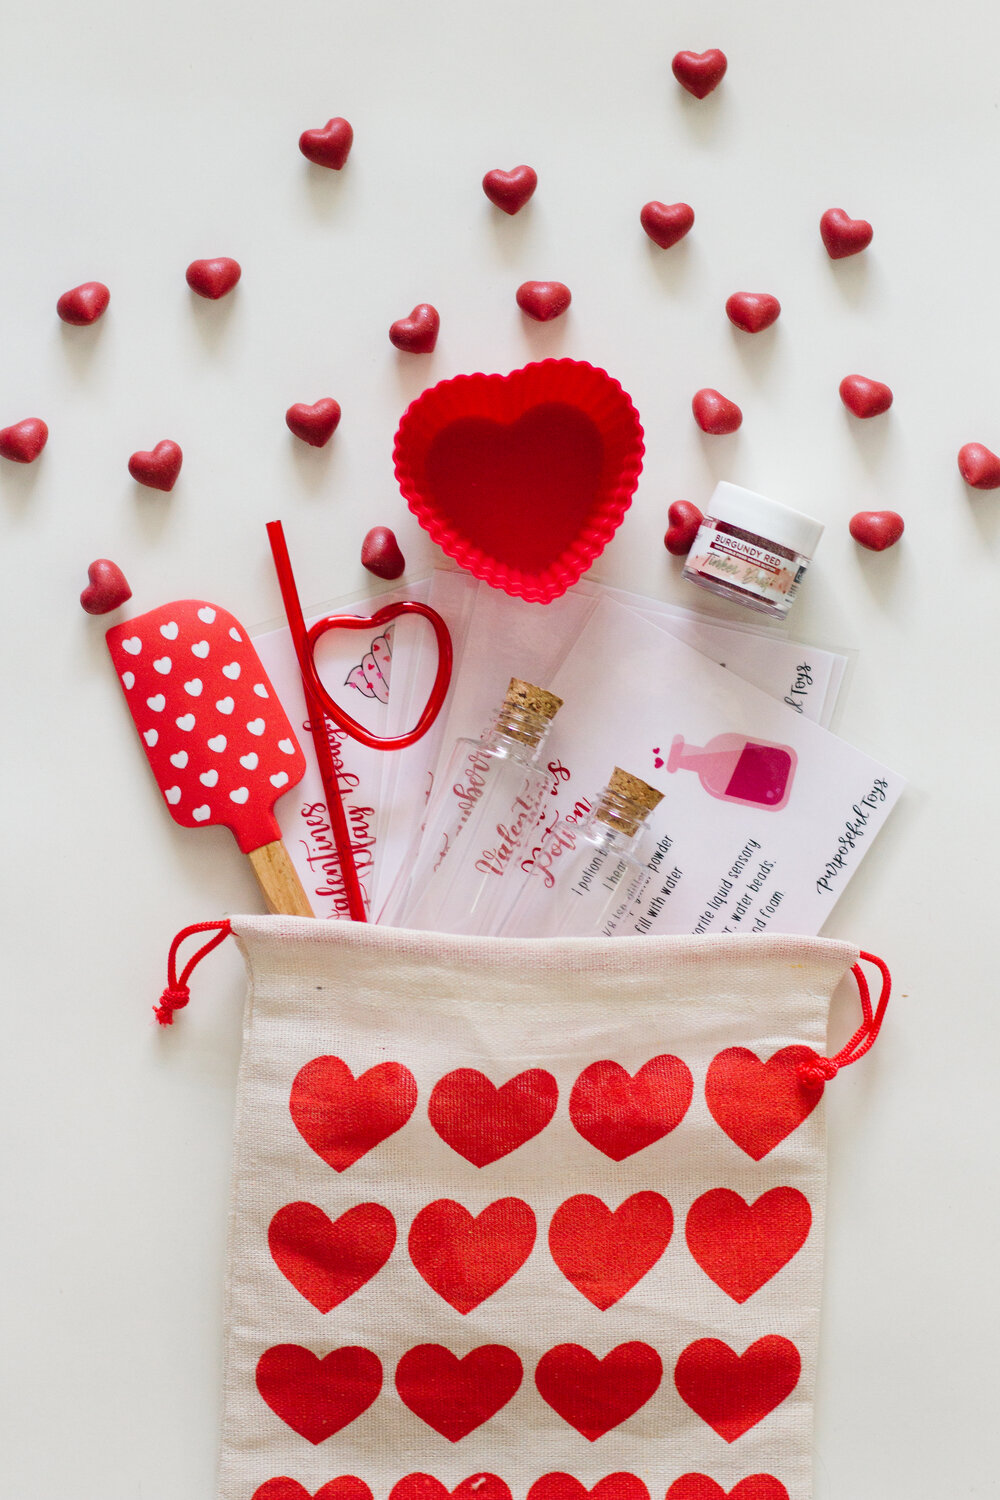 60 DIY Valentine's Day Gifts For Your Sweetheart: Shop Our, 57% OFF